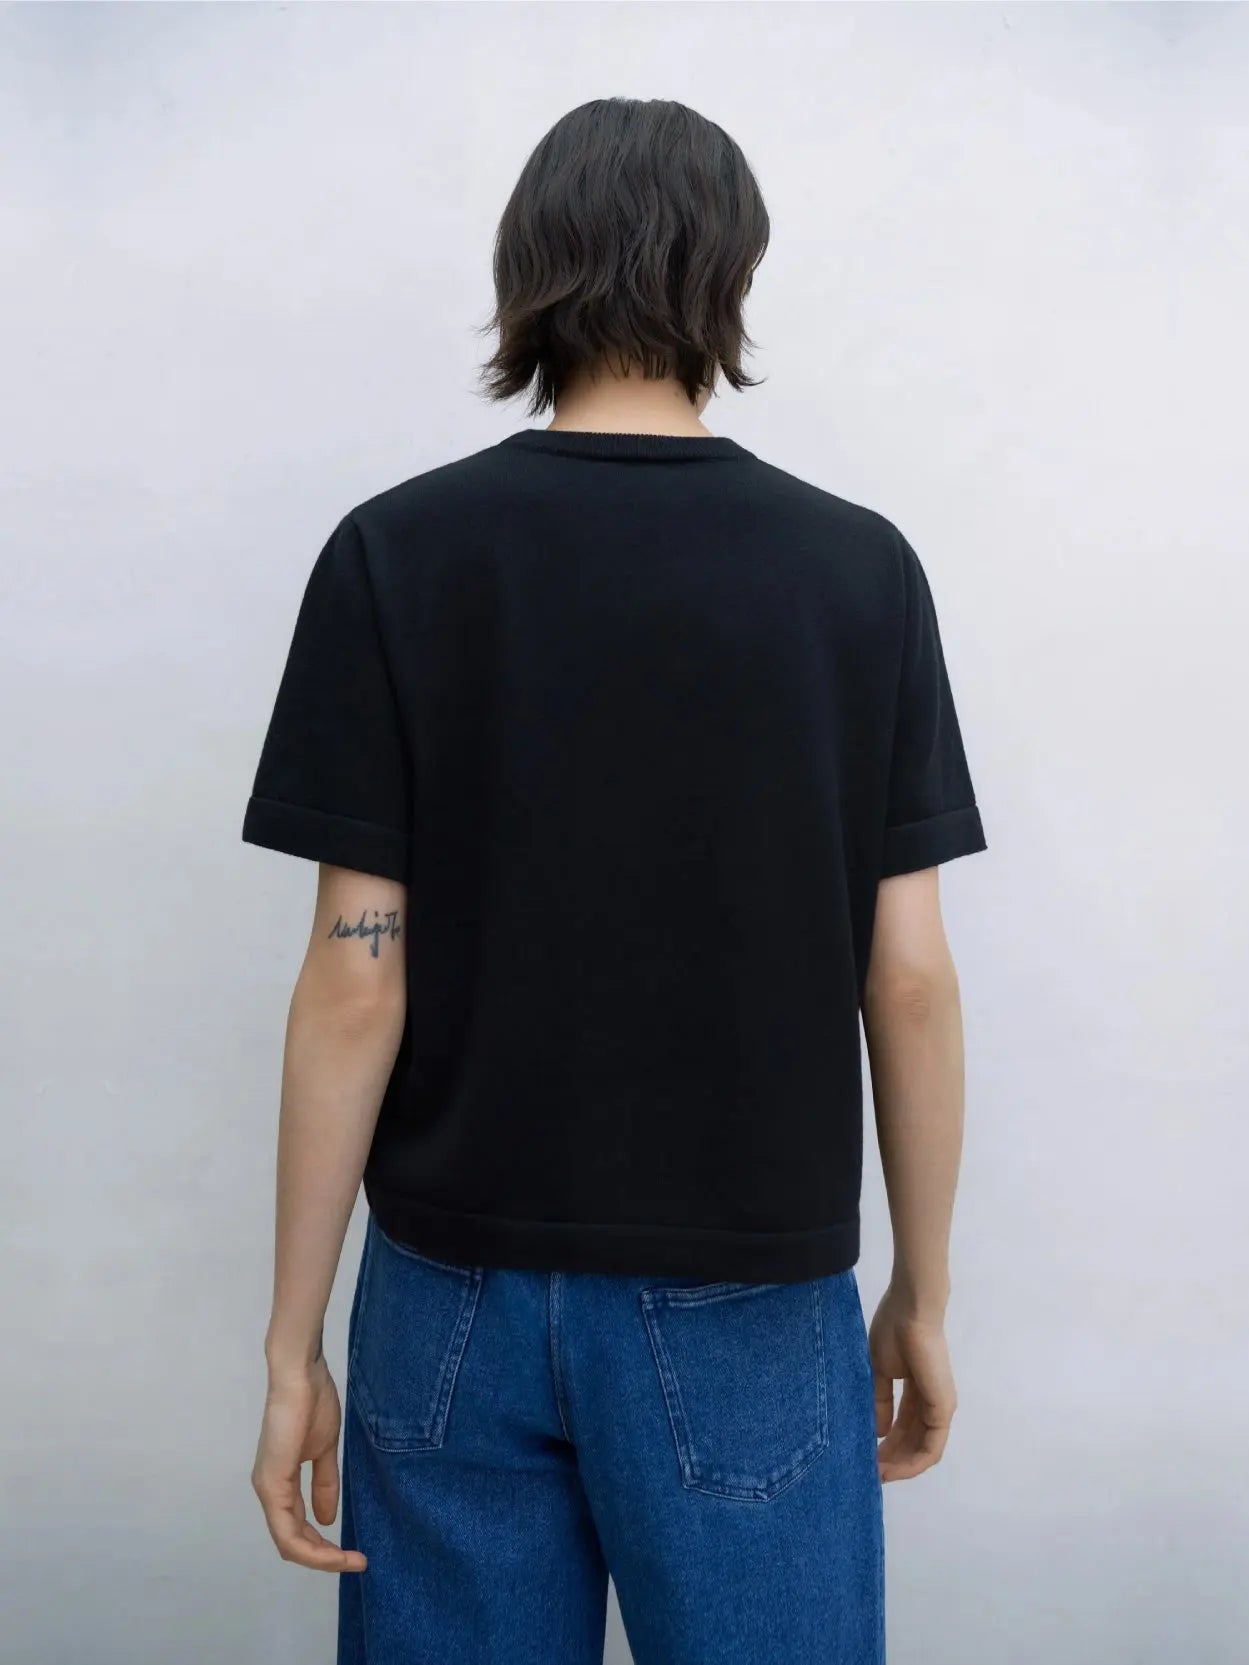 A plain, short-sleeved, black Merino Wool T-Shirt is displayed against a white background. The T-shirt features a simple crew neck design and is free of any logos, patterns, or graphics. This minimalist staple by Cordera can be found at BassalStore in Barcelona.